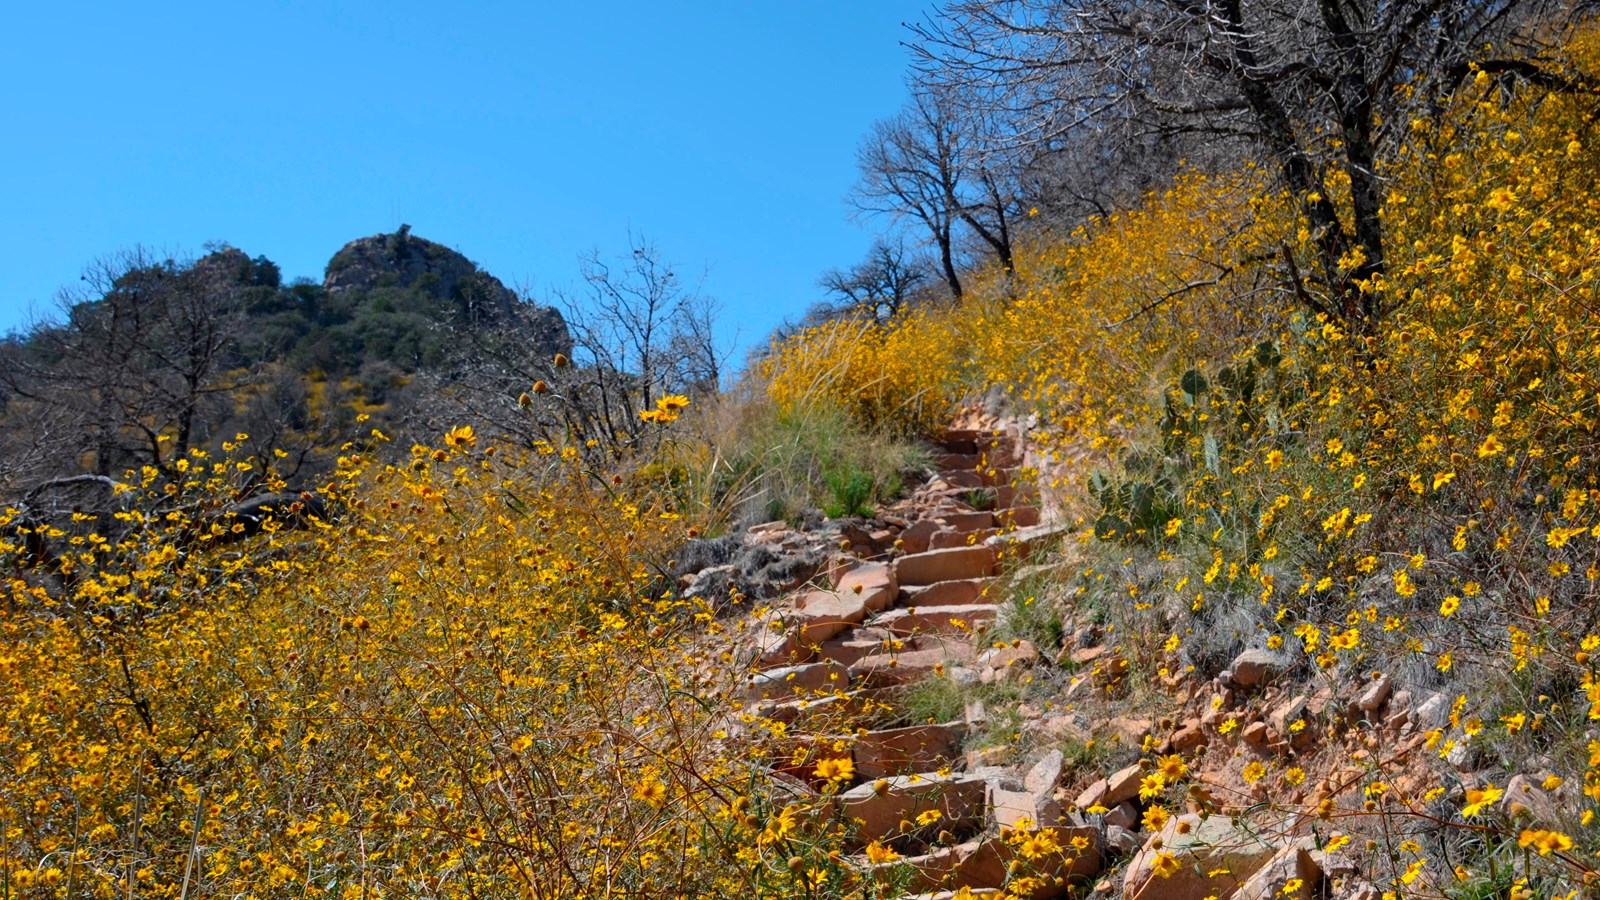 A trail composed of rock steps climbs the side of a hill covered in yellow flowers.